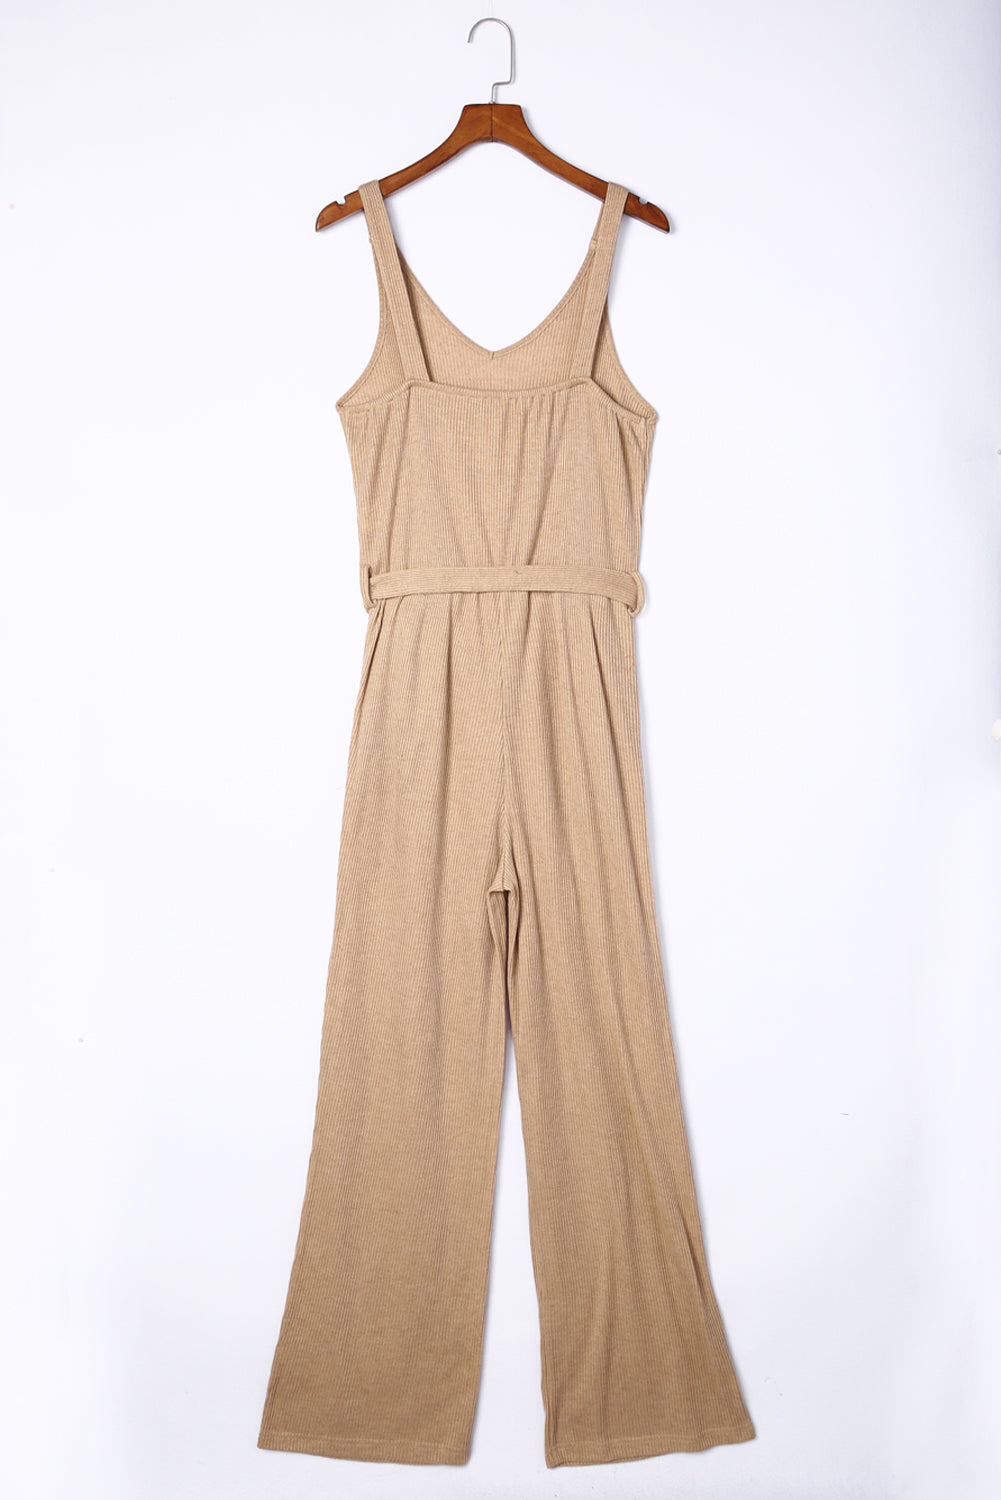 Apricot Casual Sleeveless Buckle Sash Knit Jumpsuit Jumpsuits & Rompers JT's Designer Fashion